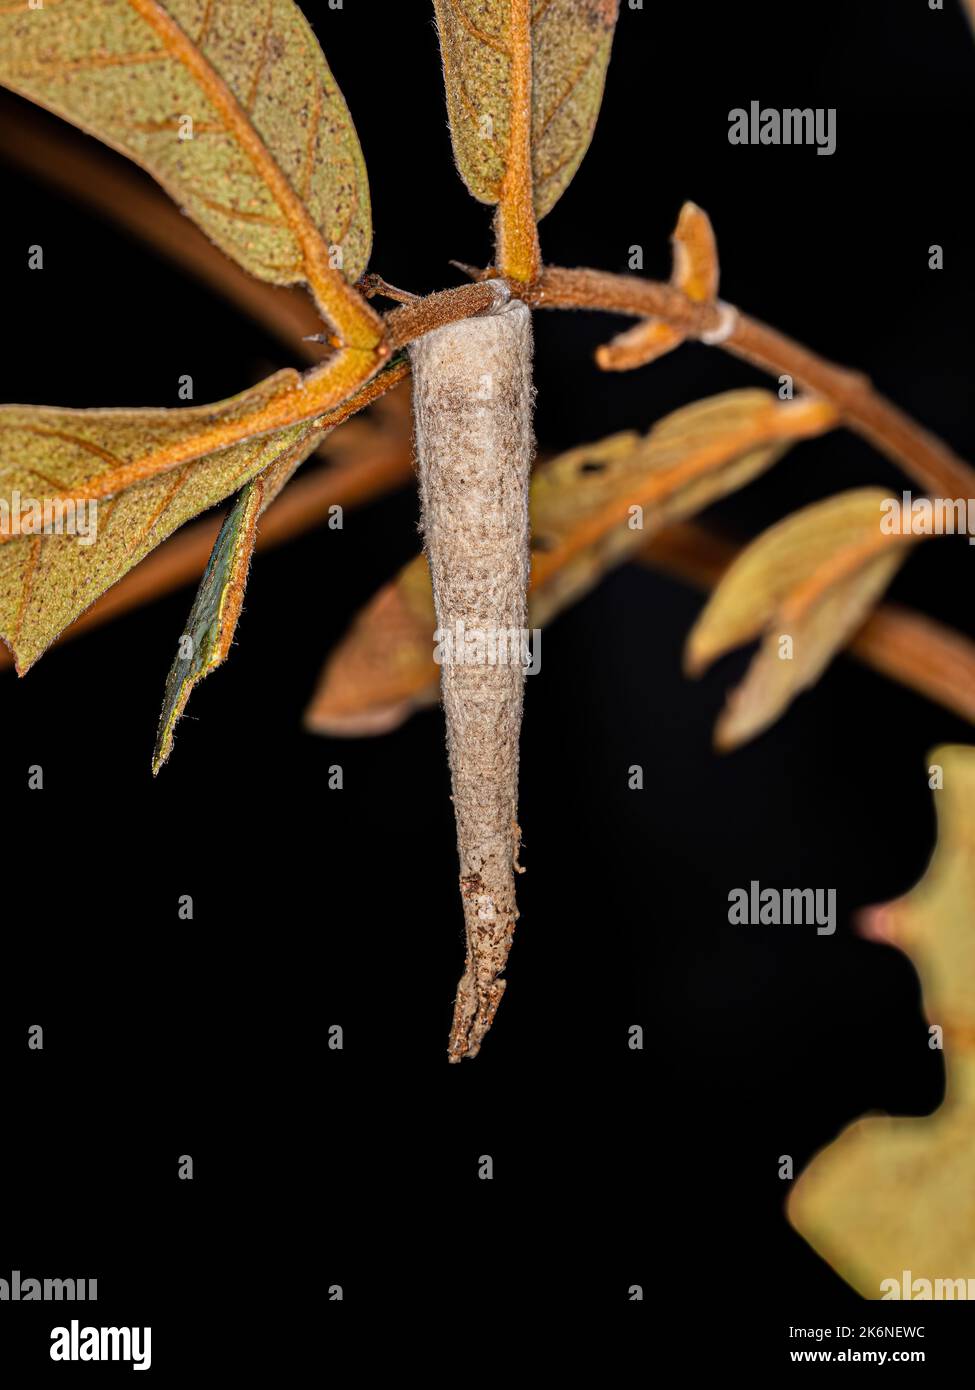 Small Bagworm Moth of the Family Psychidae Stock Photo